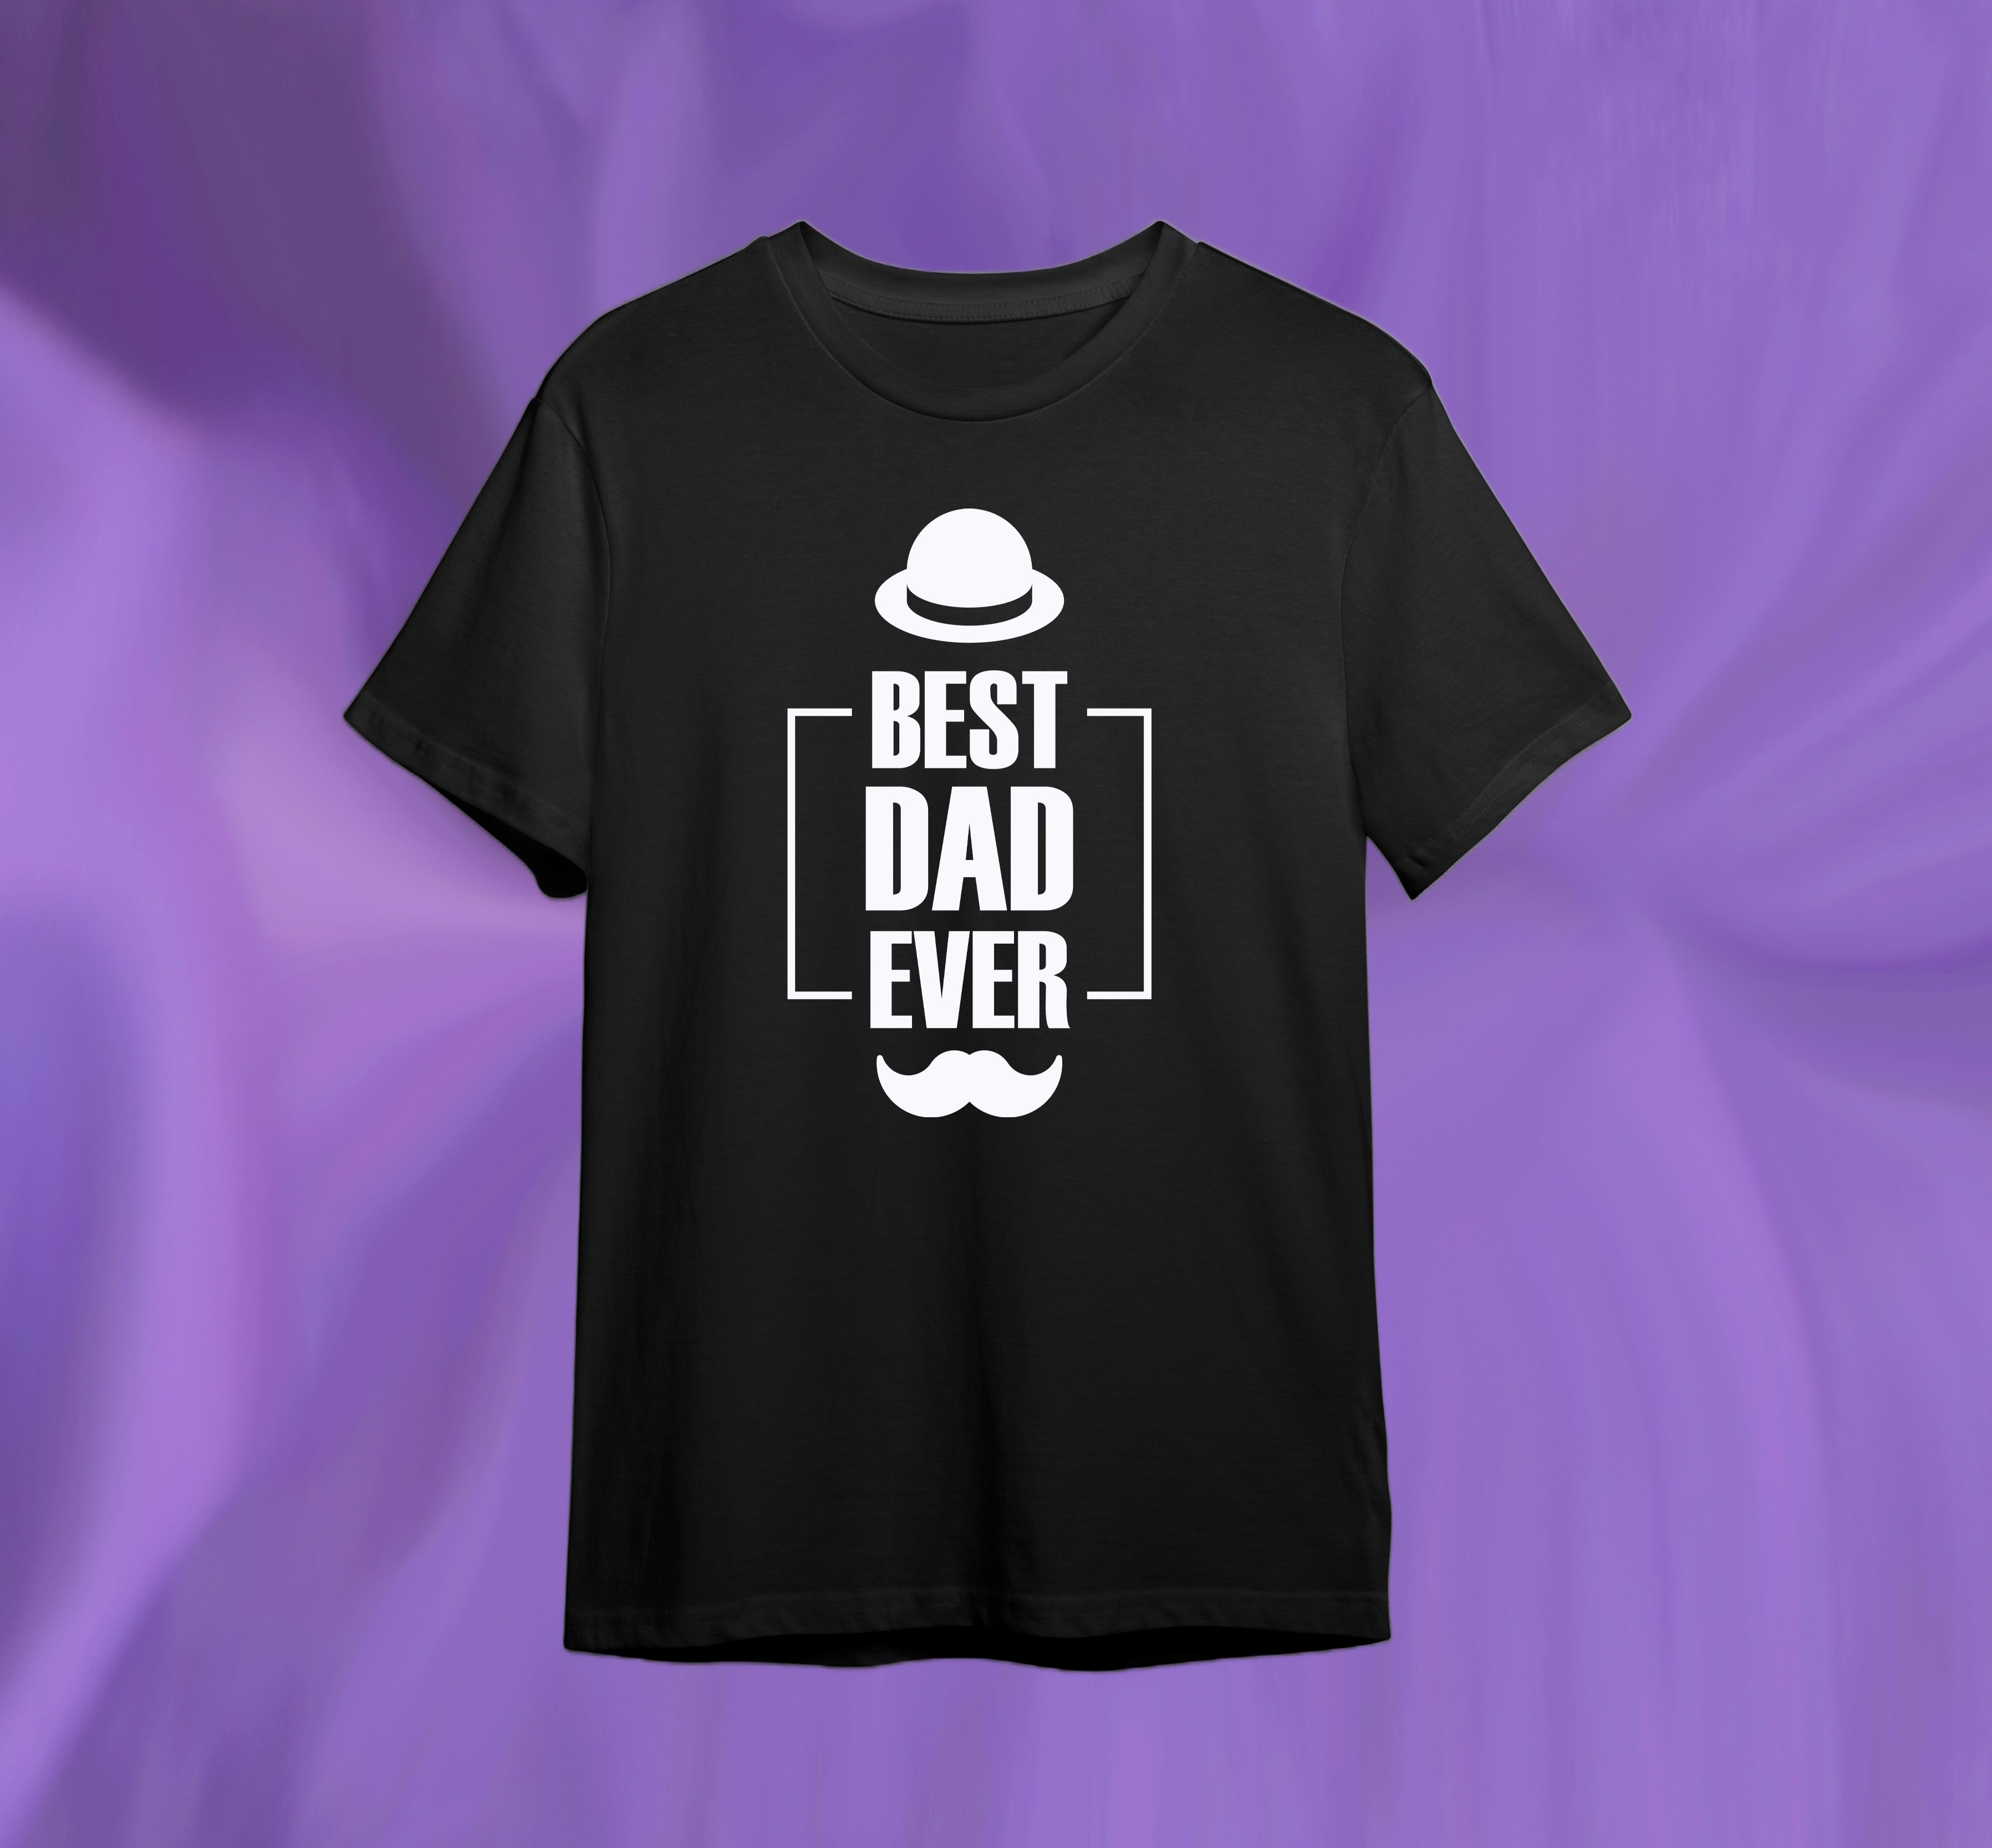 T-shirts for Fathers Day